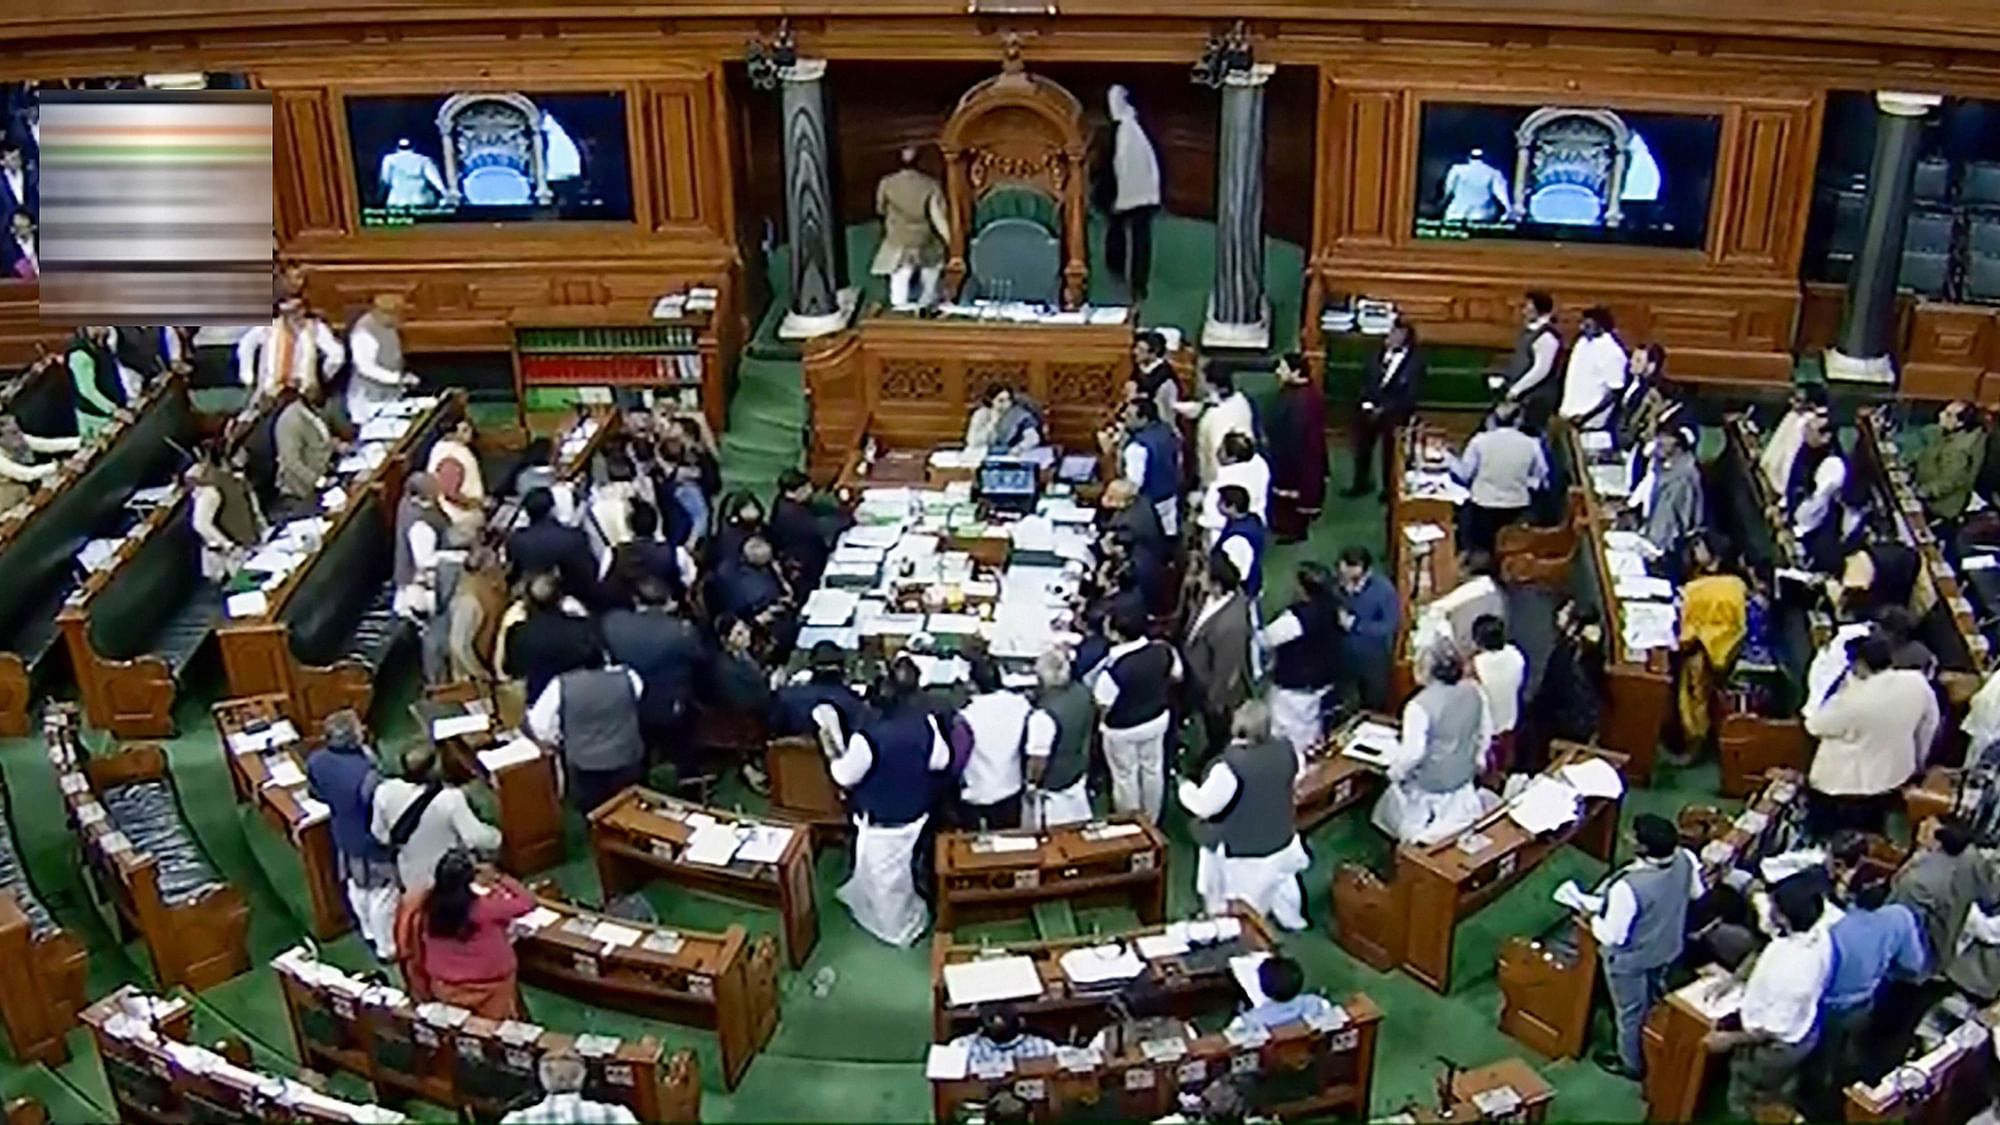 Congress and BJP MPs nearly came to blows over Rahul Gandhi’s comment on PM Modi